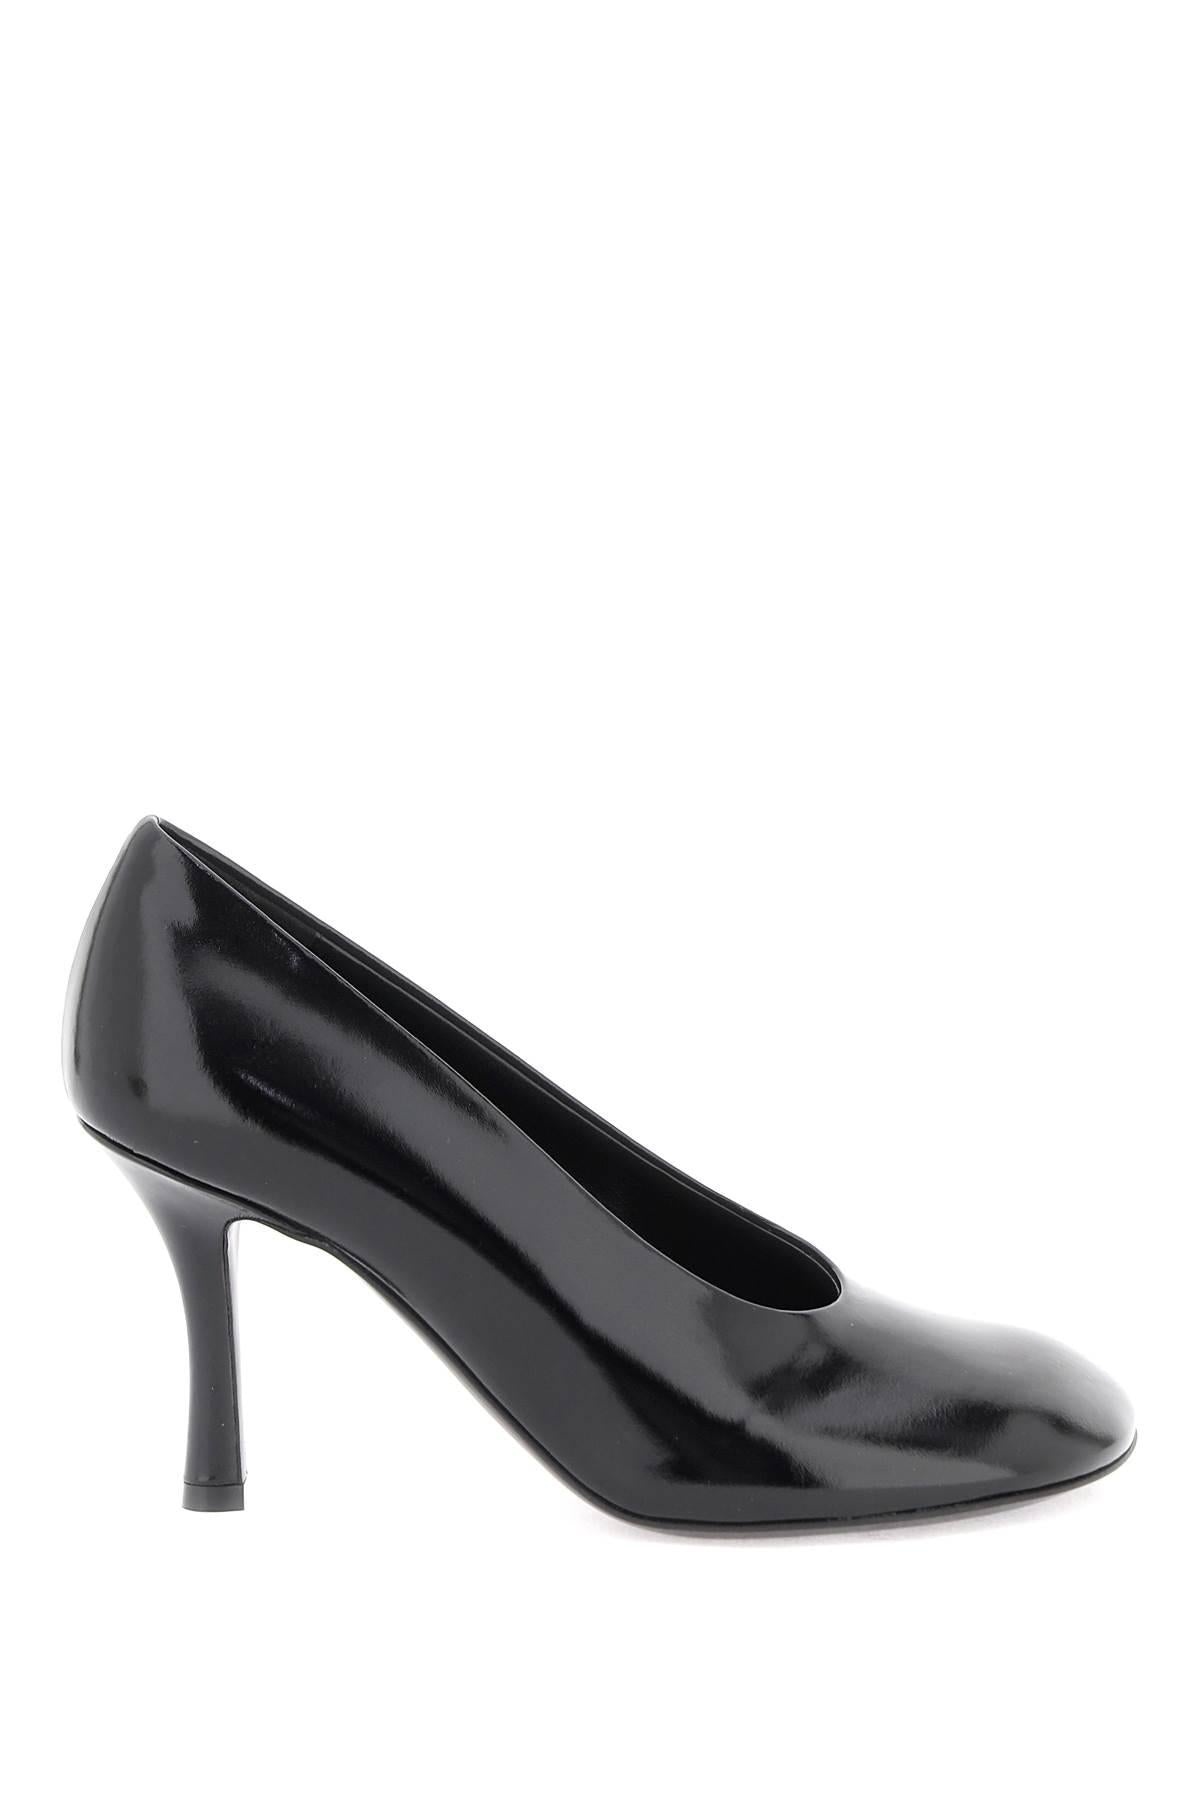 Burberry Glossy Leather Baby Pumps - 1